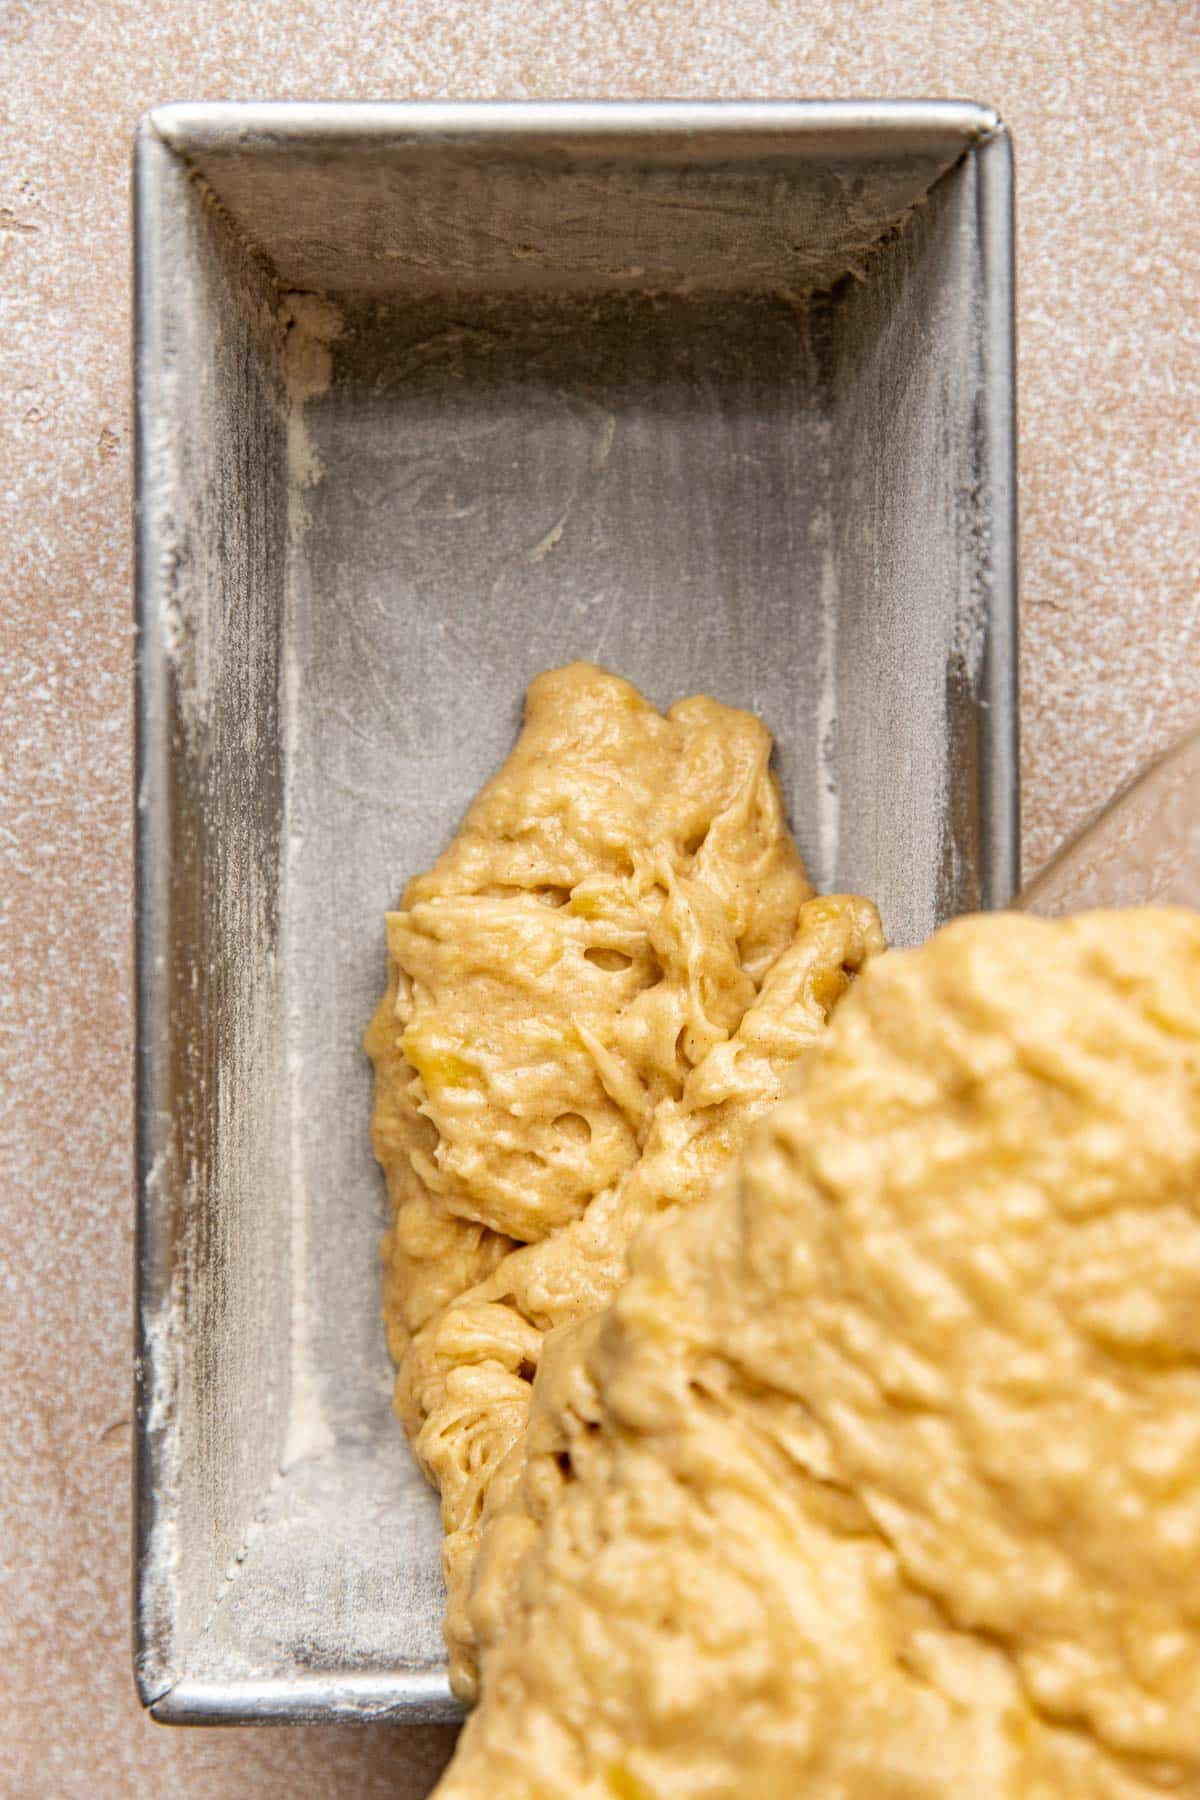 banana bread batter being poured into a greased and floured